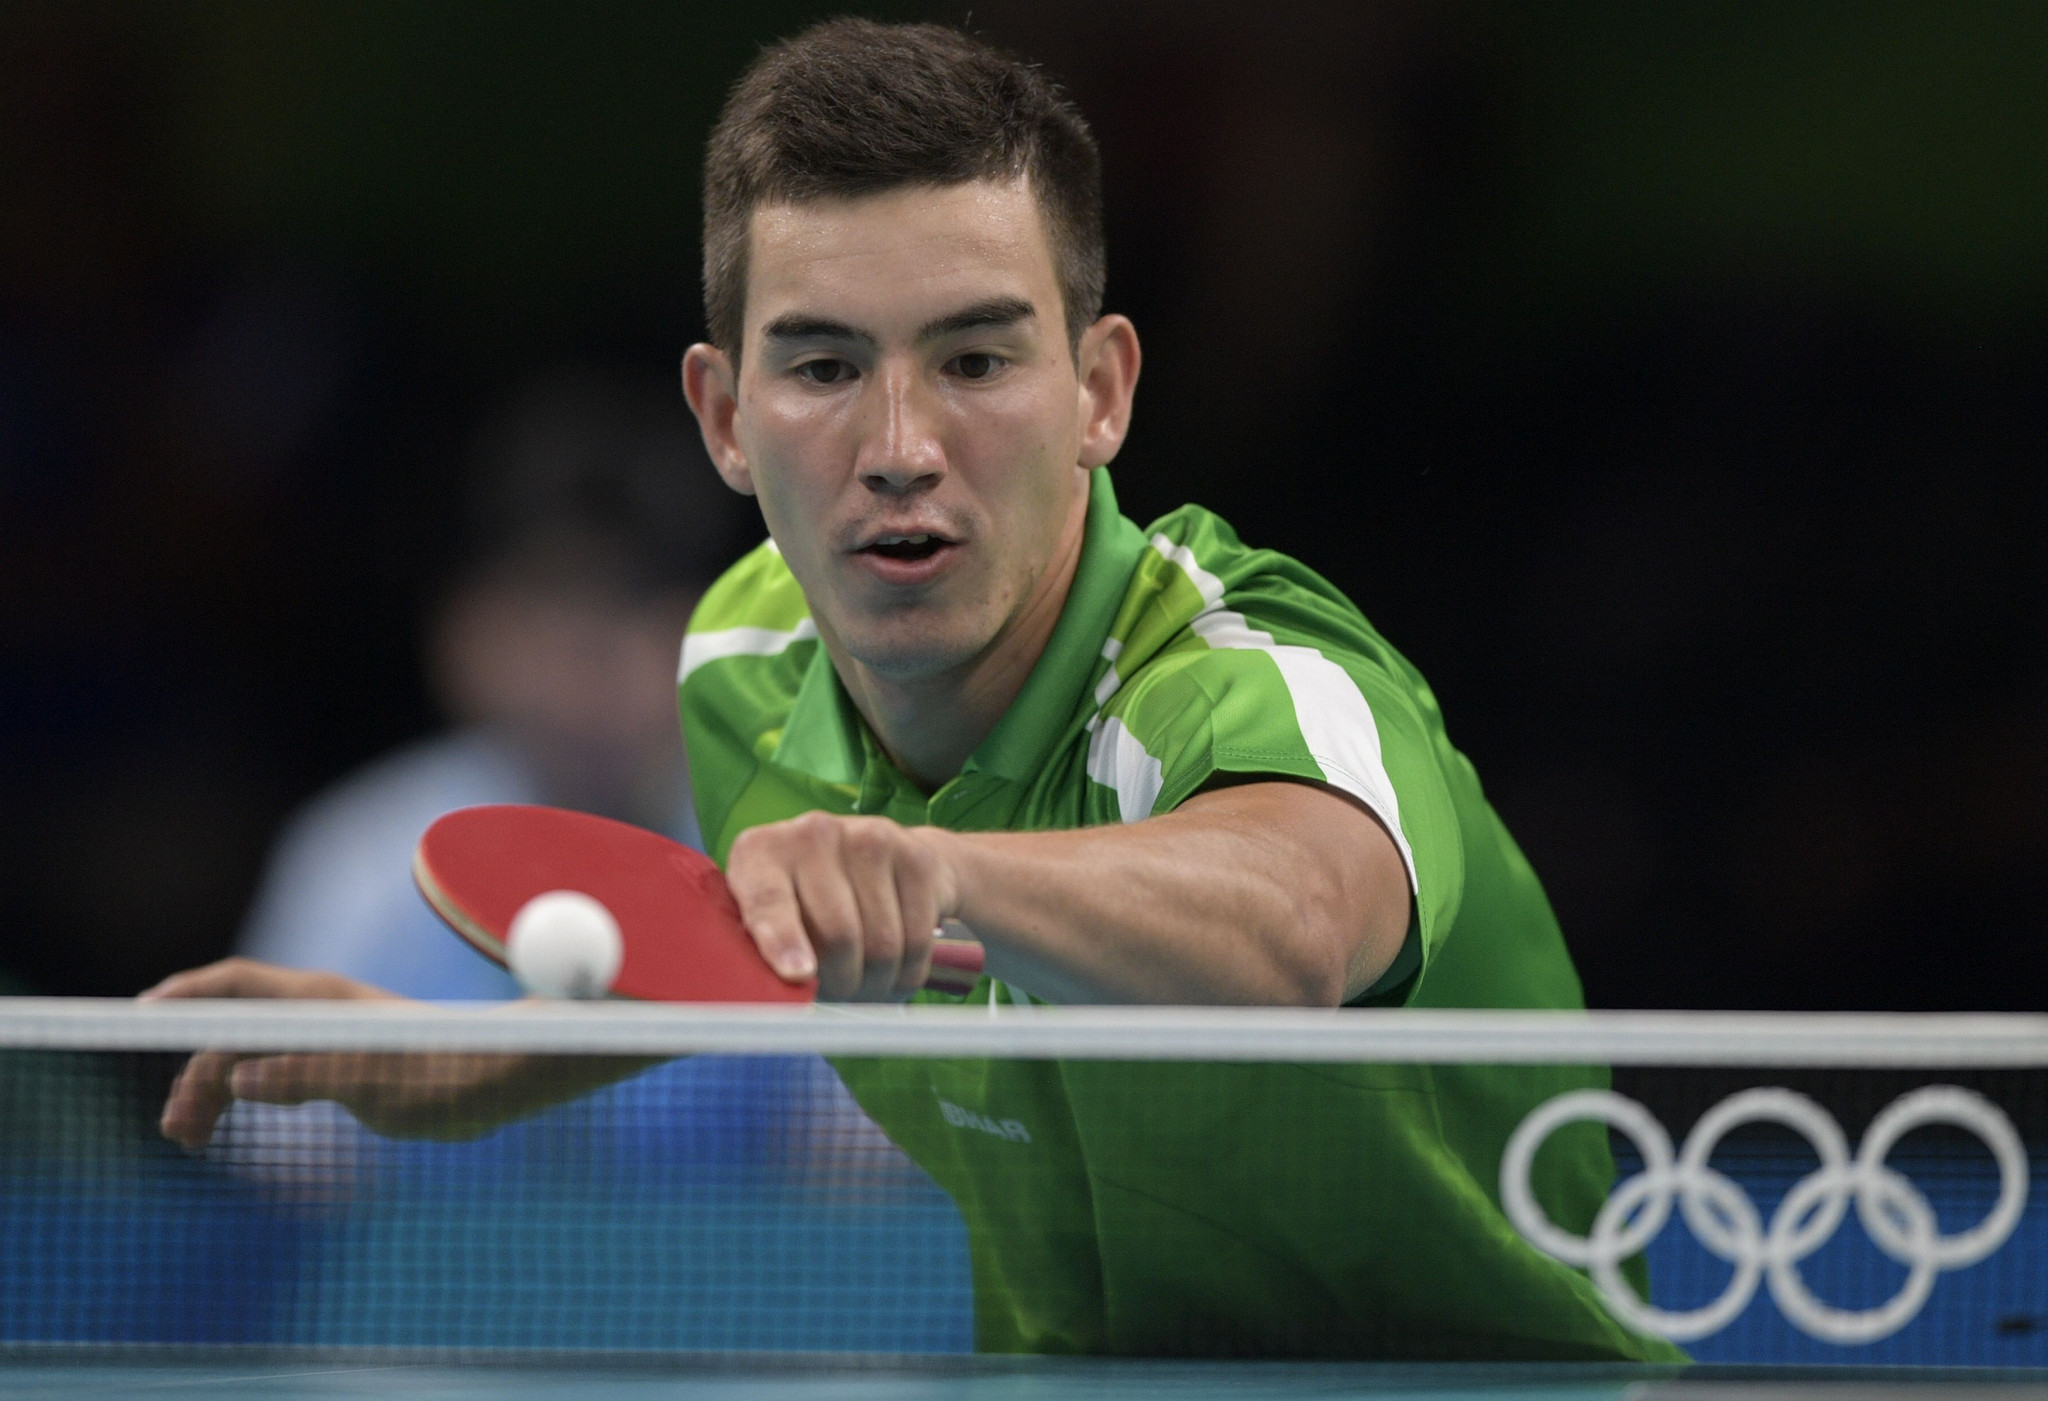 Finalists for last Asian Tokyo 2020 table tennis spots confirmed in Doha